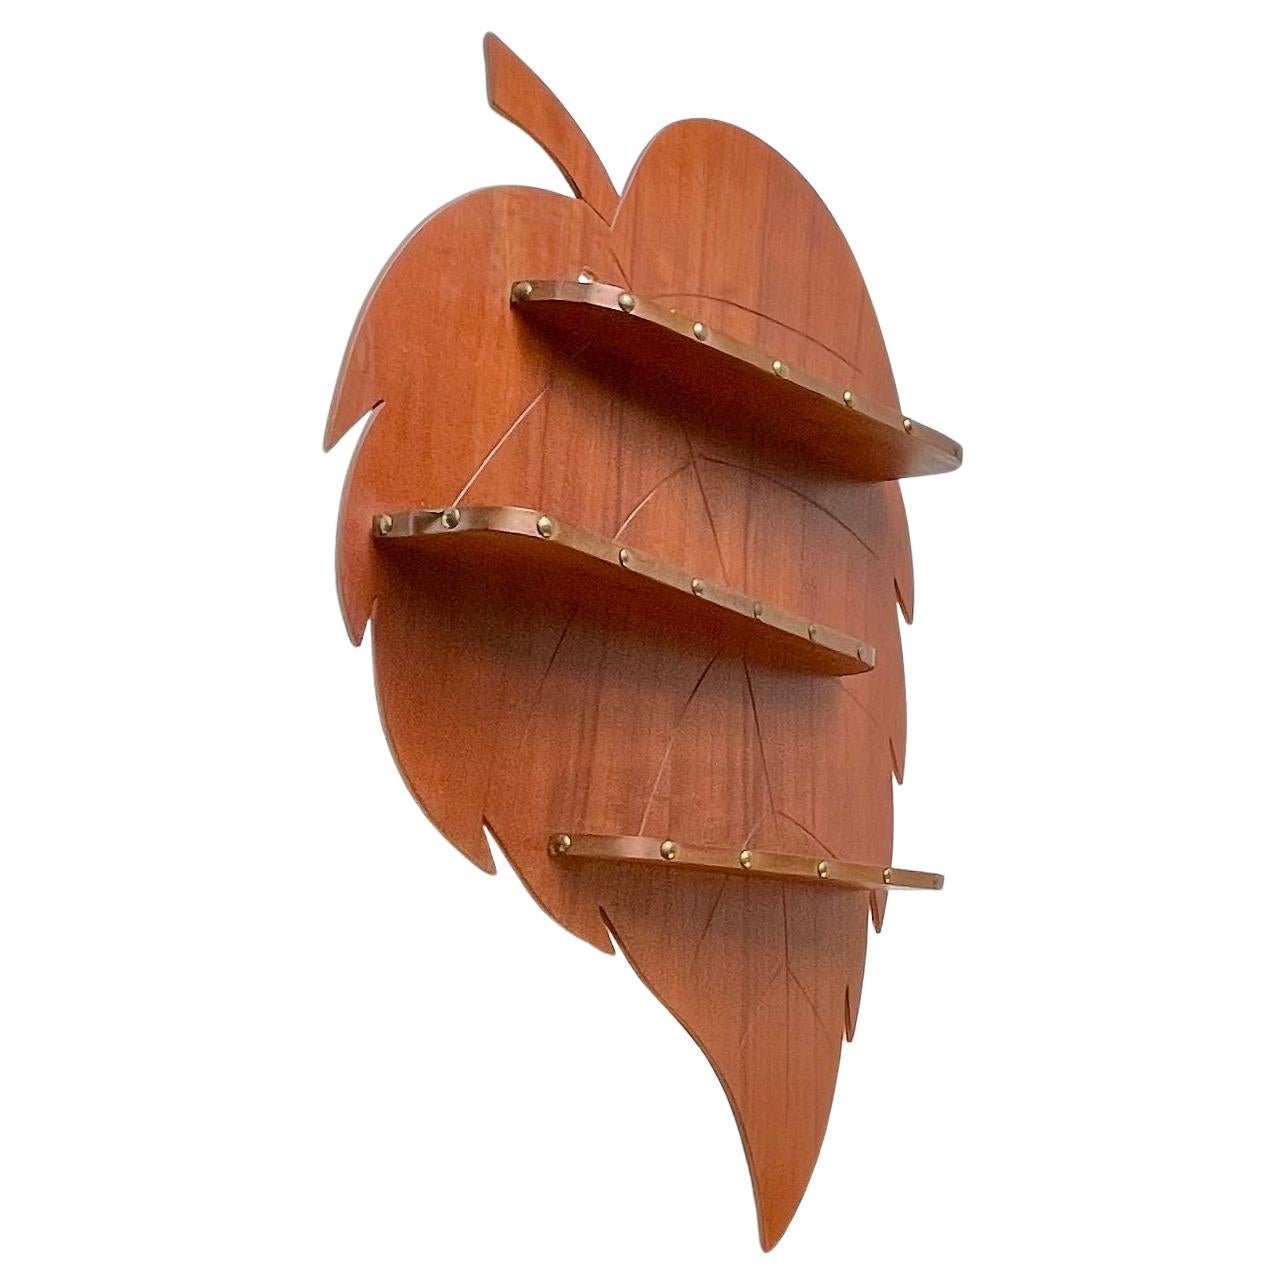 Danish Mid-Century Leaf Spice Rack in Teak and Copper, 1960s For Sale